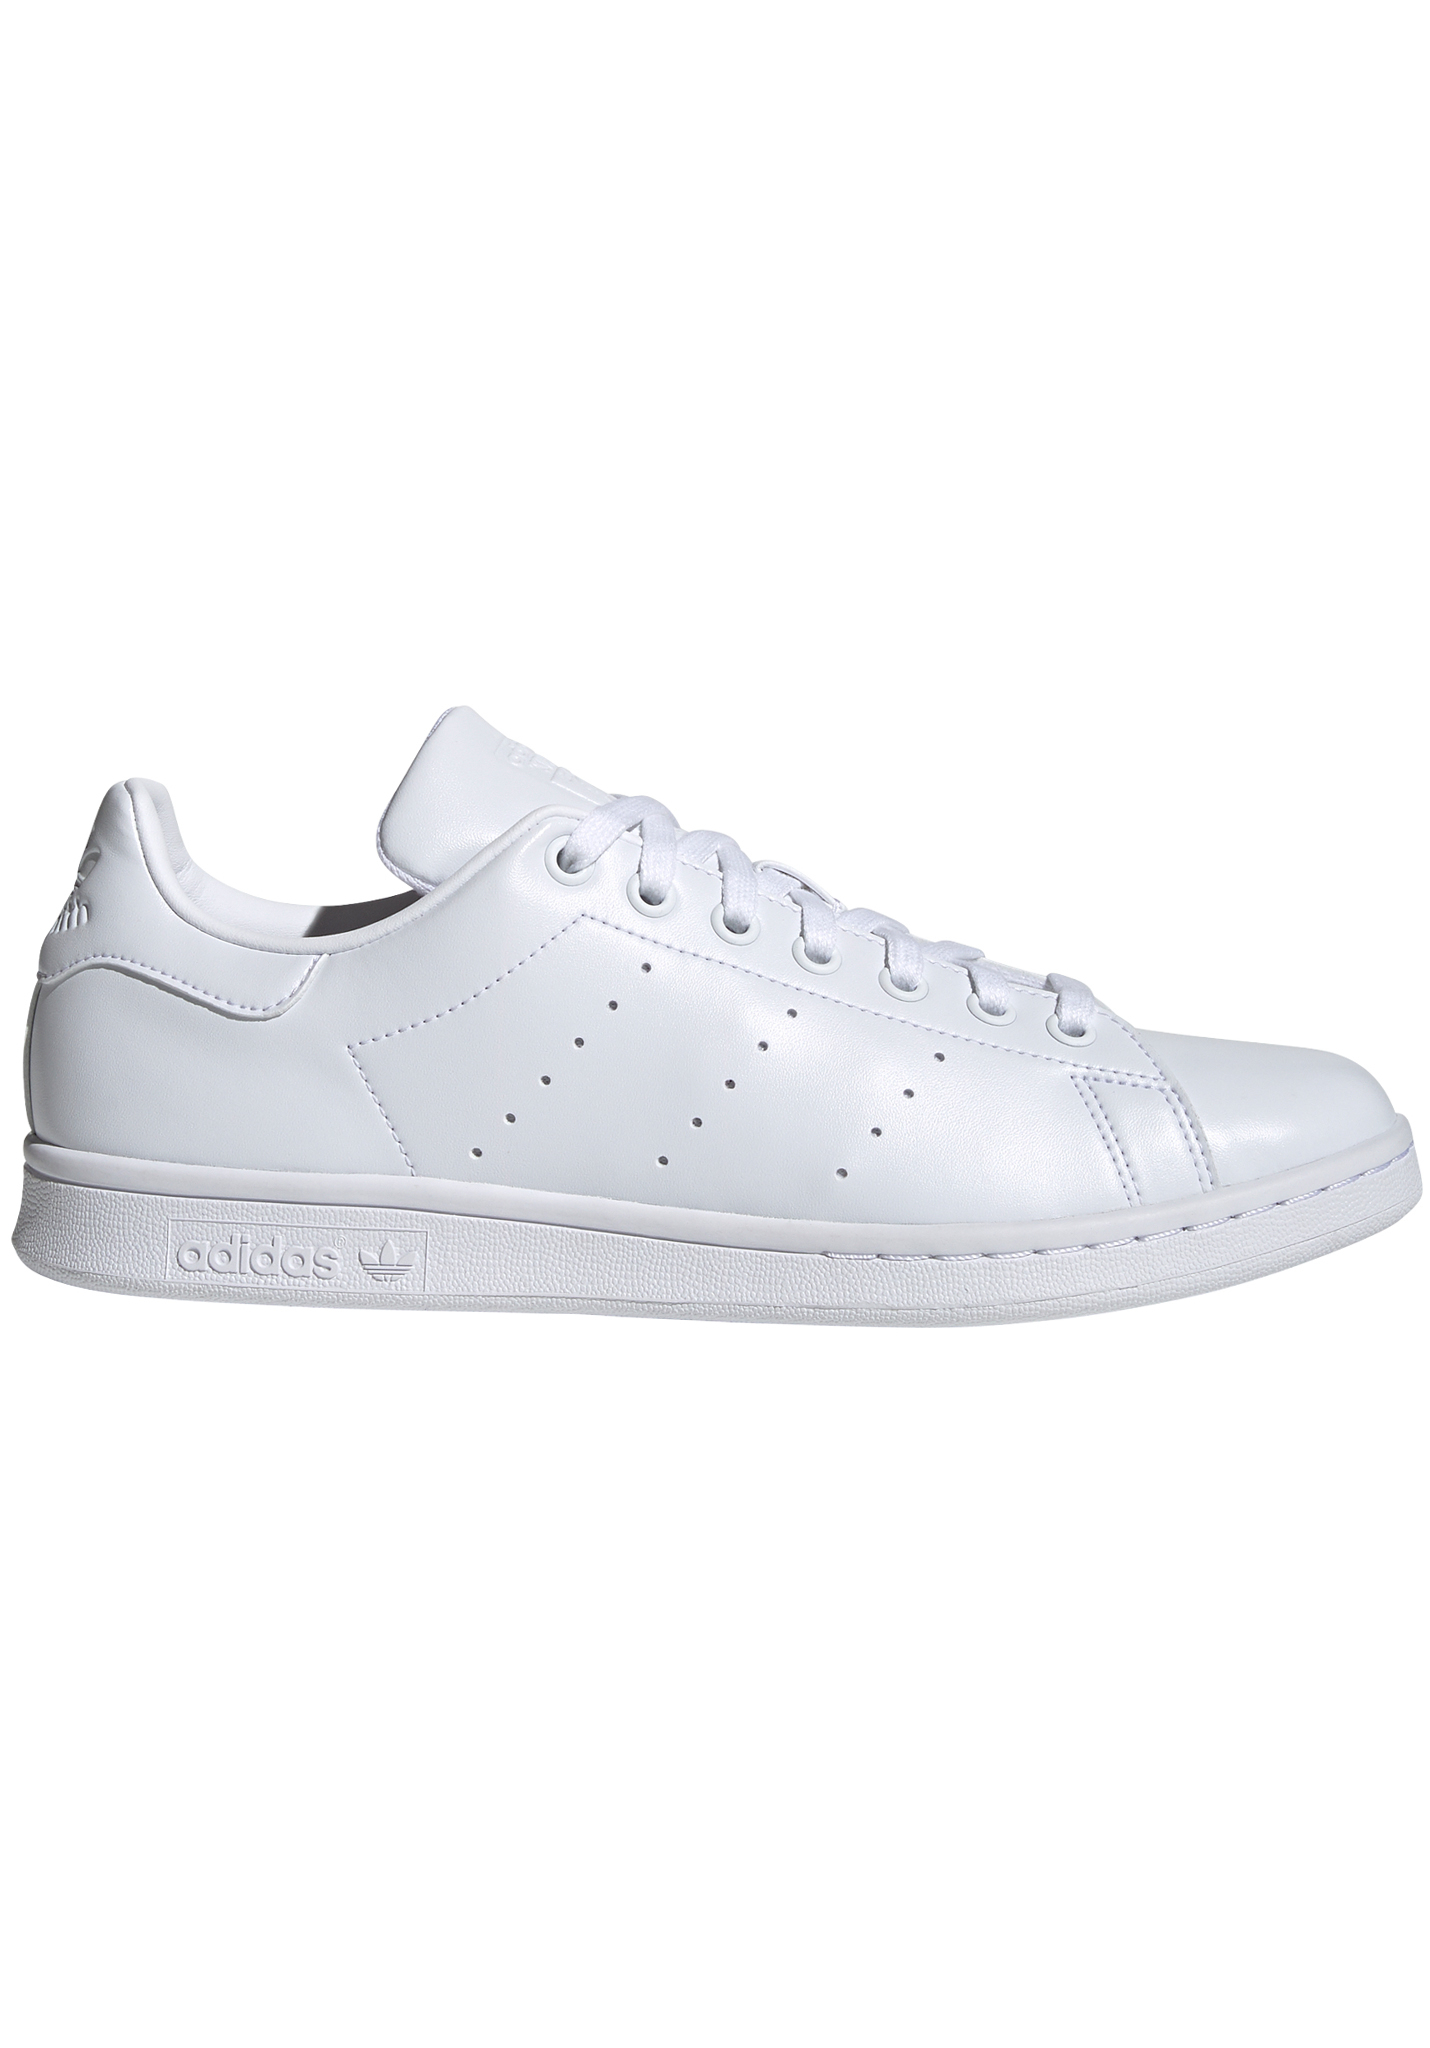 Adidas Originals Stan Smith Sneaker Low white + lace 47 1/3